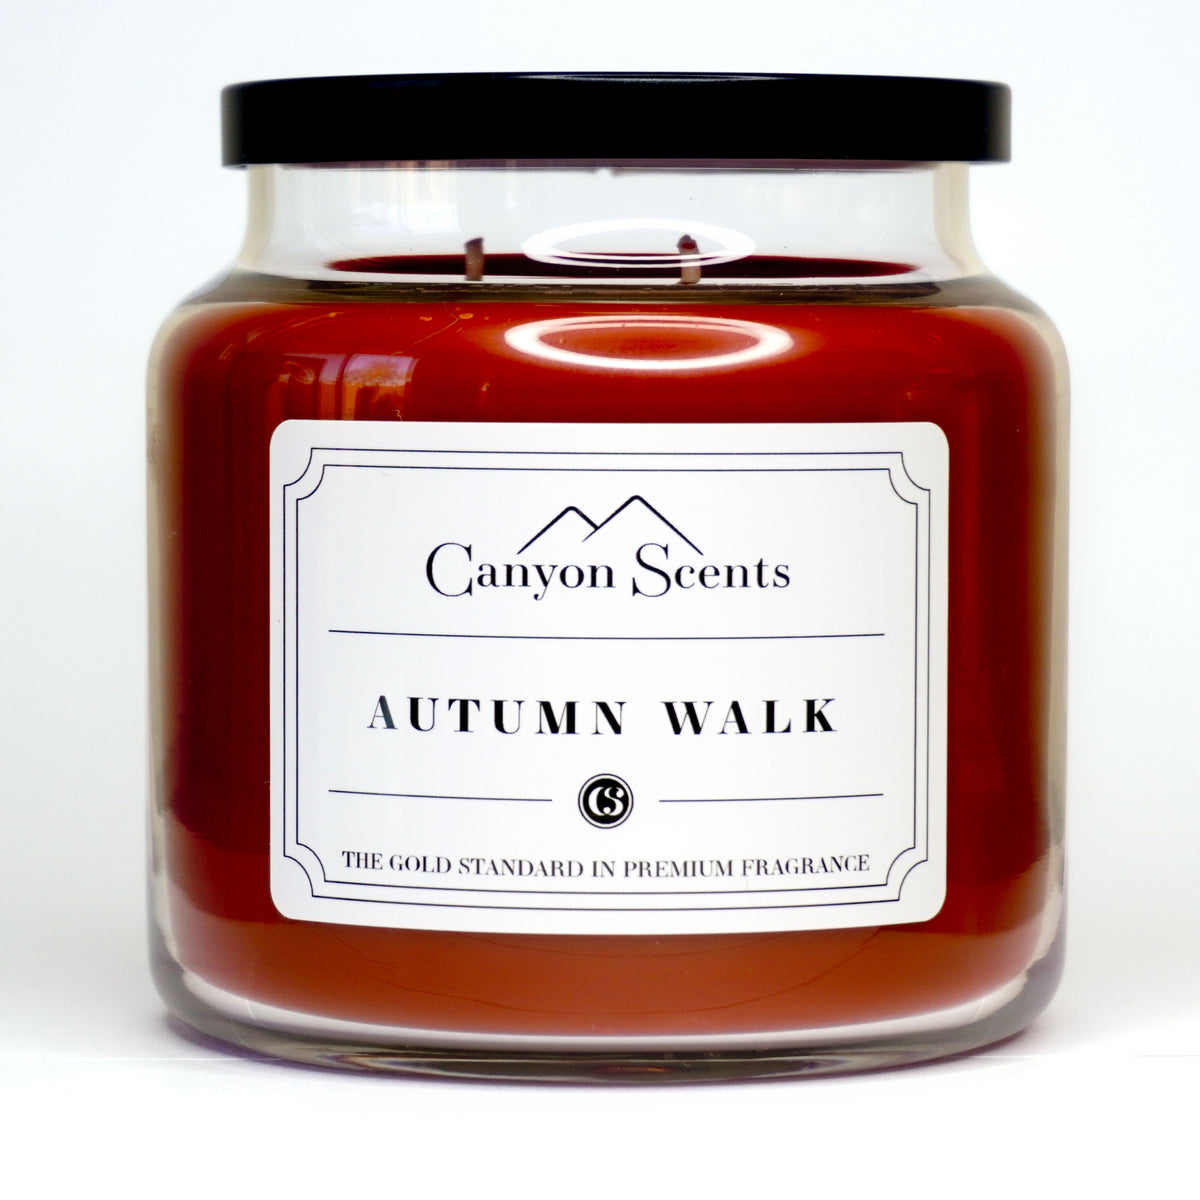 Autumn Walk - Canyon Scents Gold Canyon Candles